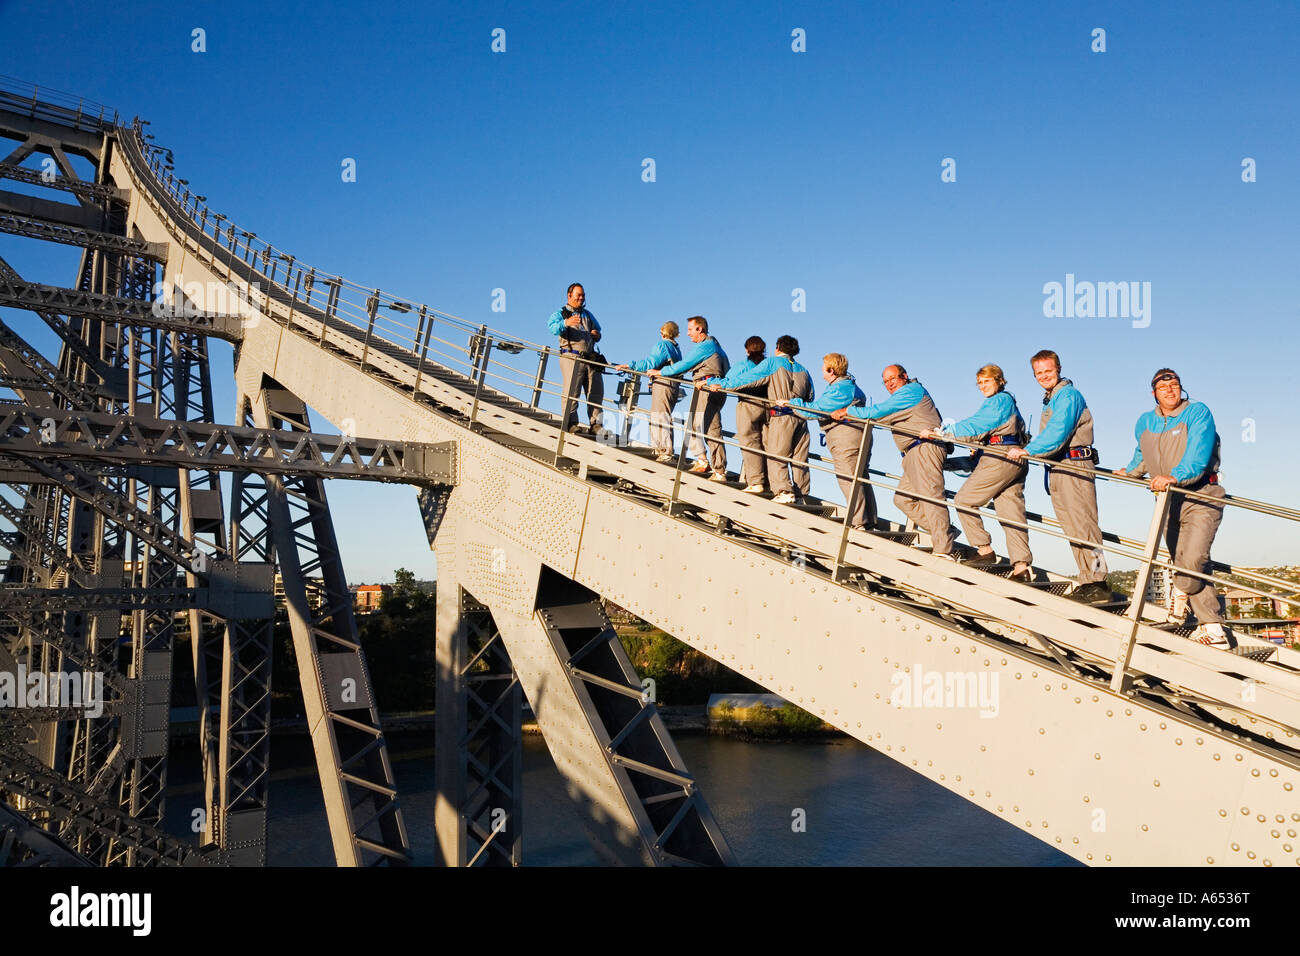 A group of climbers make their way up the steel girders of Brisbane's Story Bridge Stock Photo